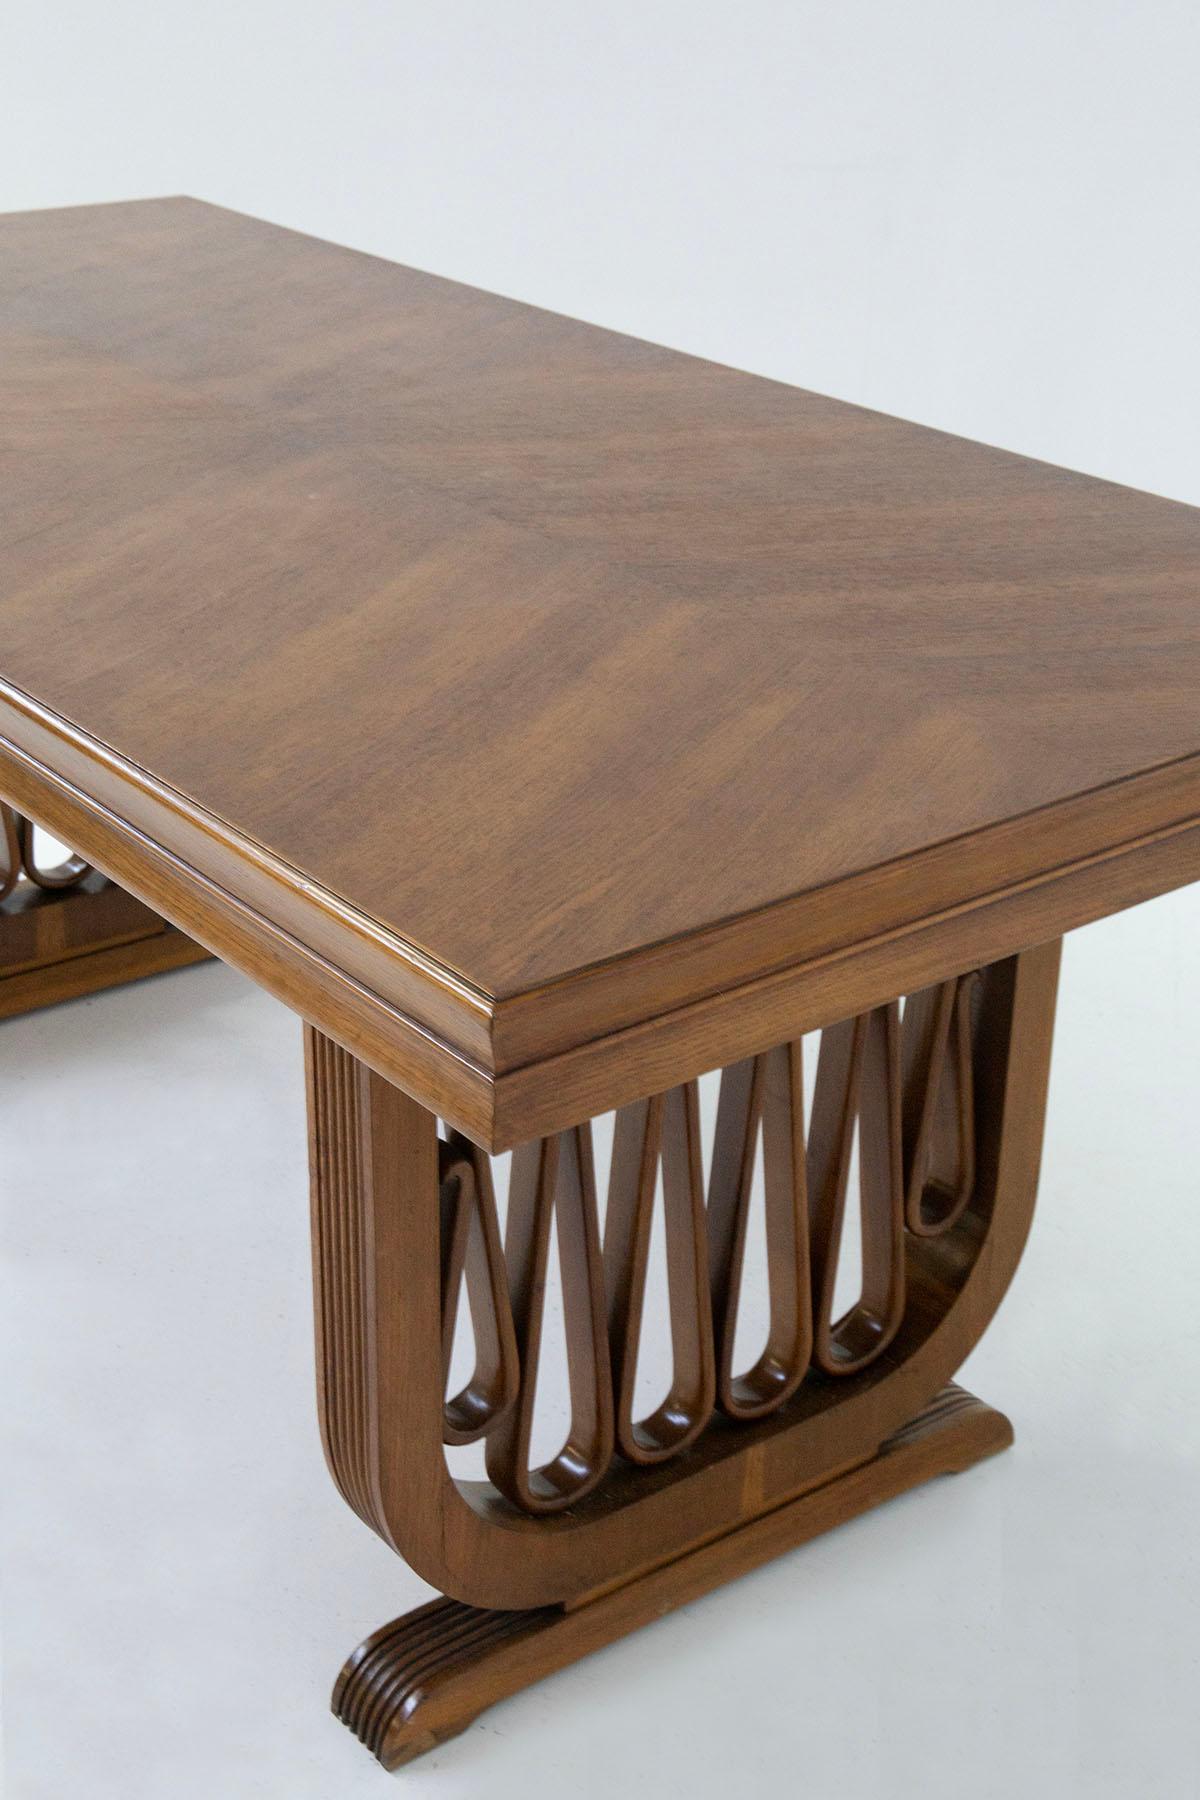 Mid-20th Century Gio Ponti Attributed Important Wooden Volute Dining Table